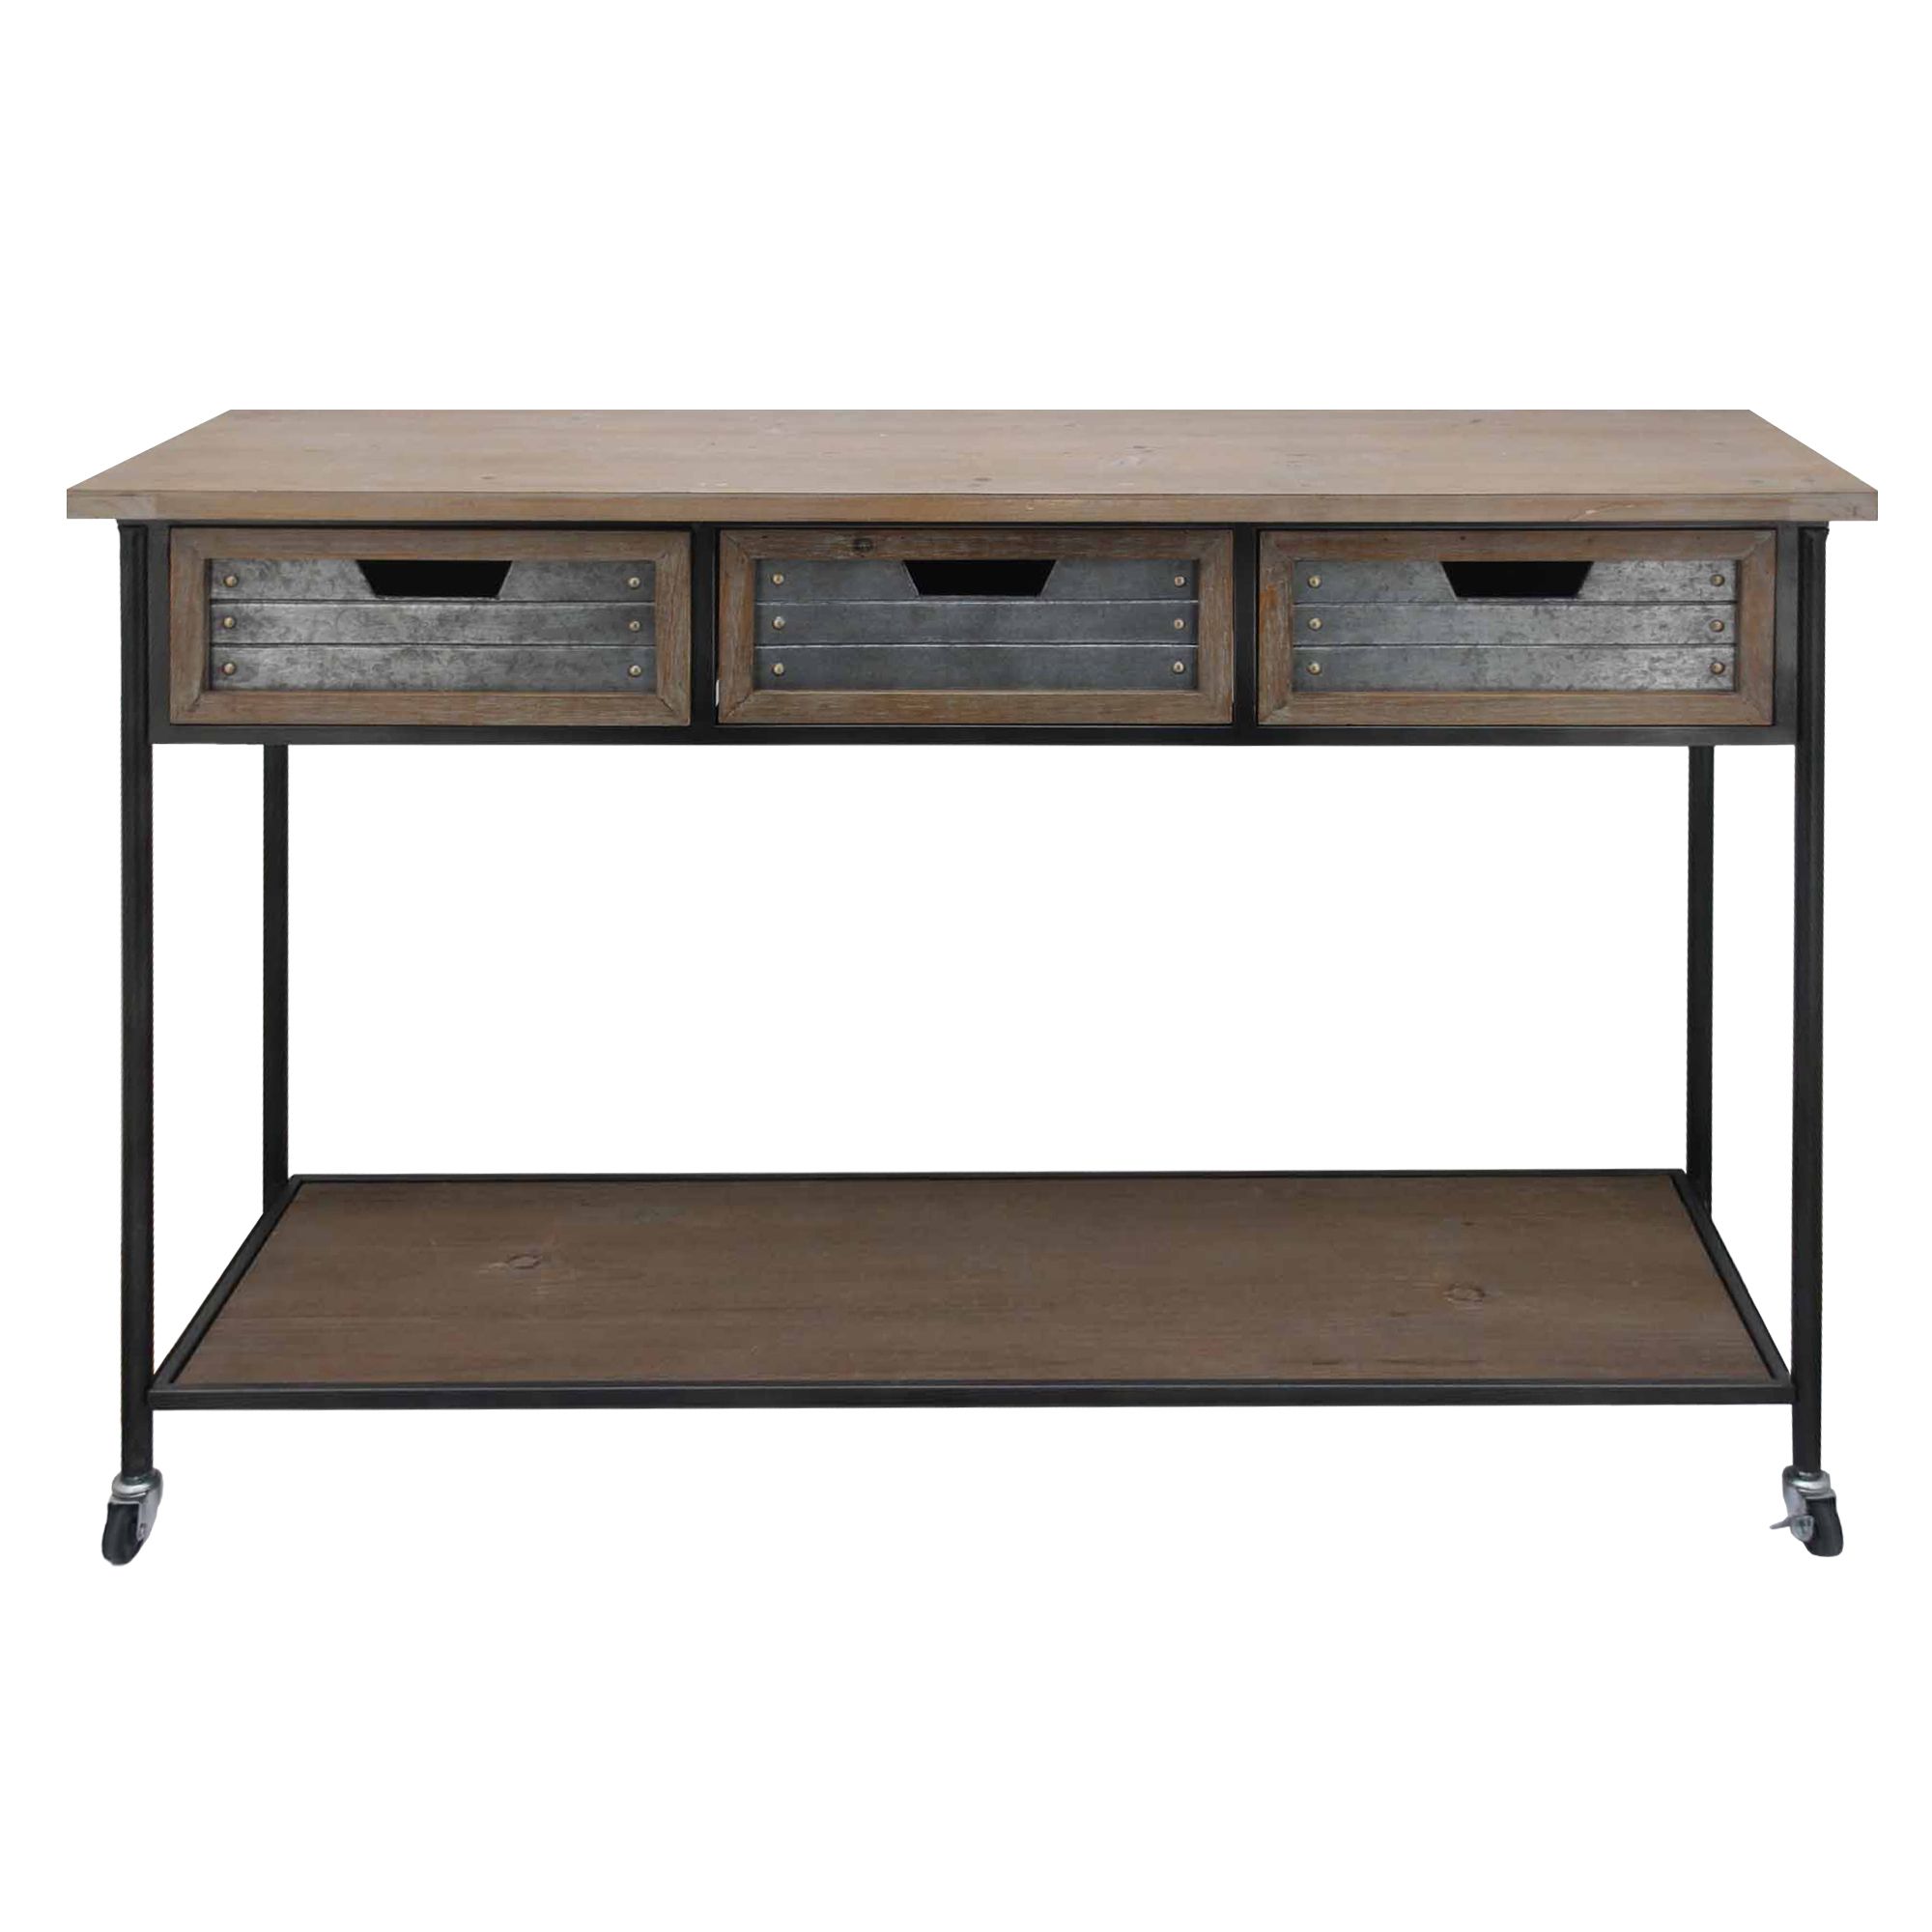 Brown And Matte Black 3 Drawer Desks Pertaining To Most Popular Caster Supported 3 Drawer Wood And Metal Console Table, Brown And Black (View 15 of 15)